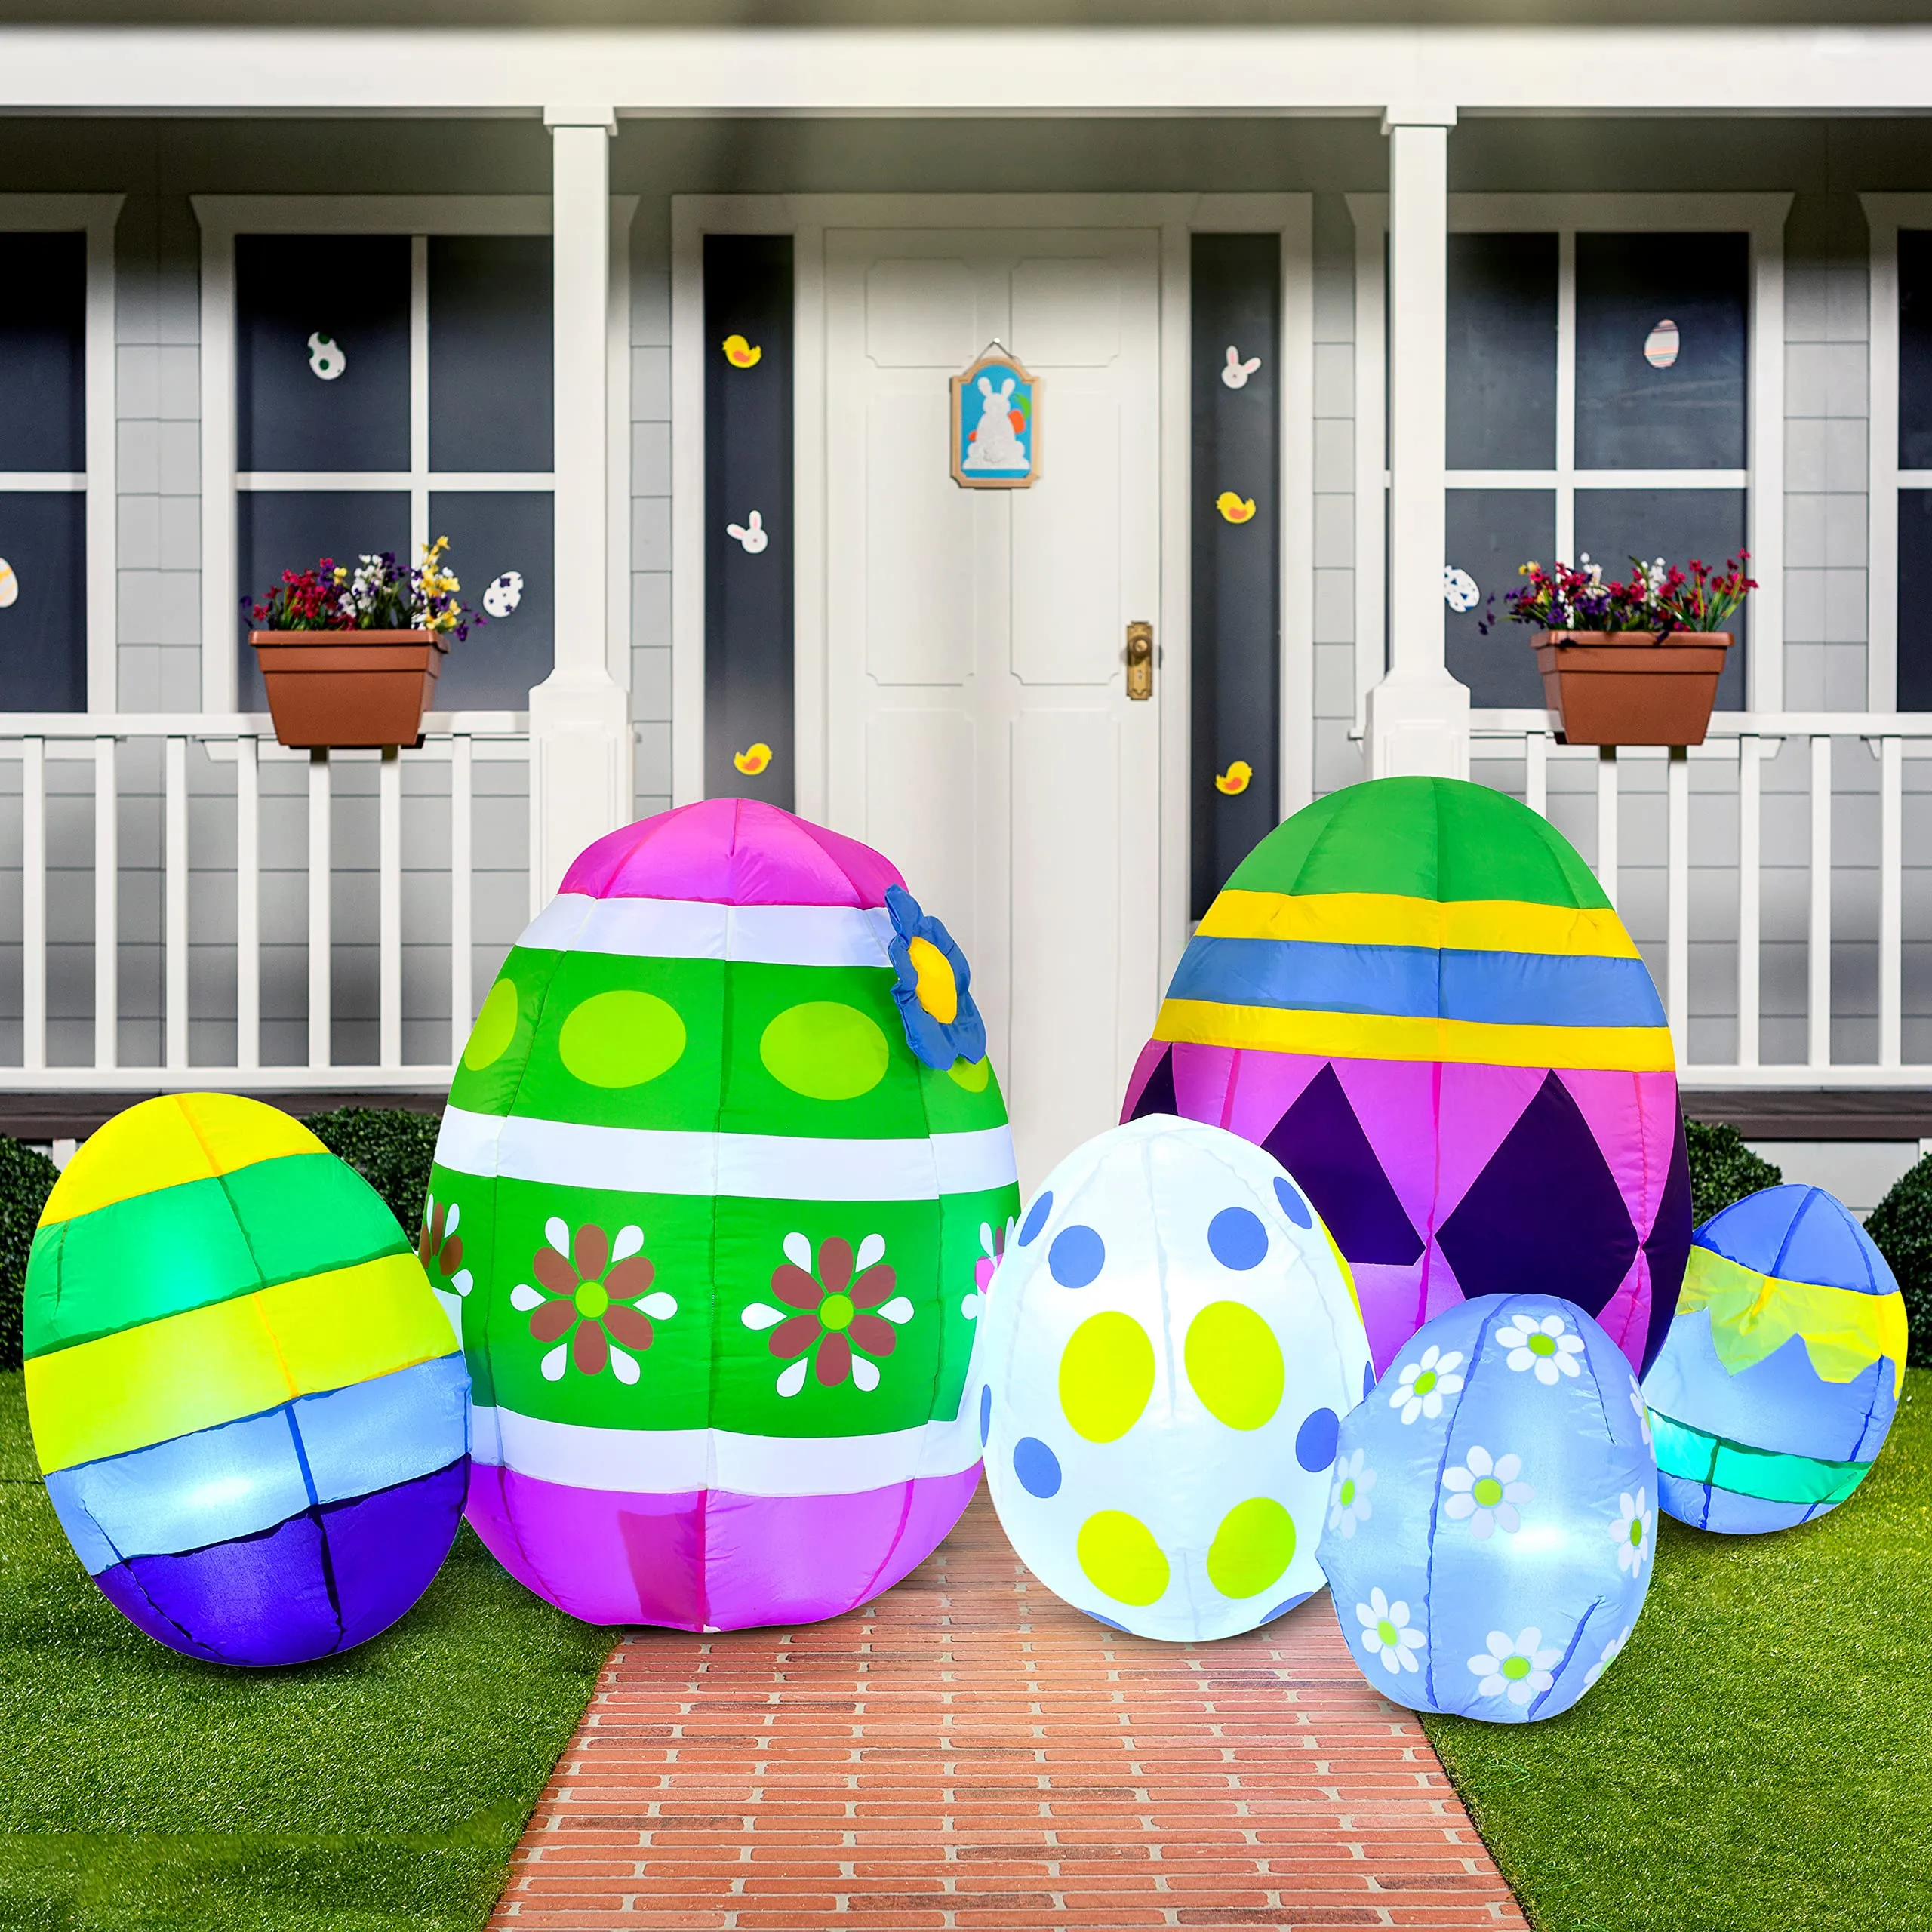 You are currently viewing Are there inflatable Easter decorations with animated elements?